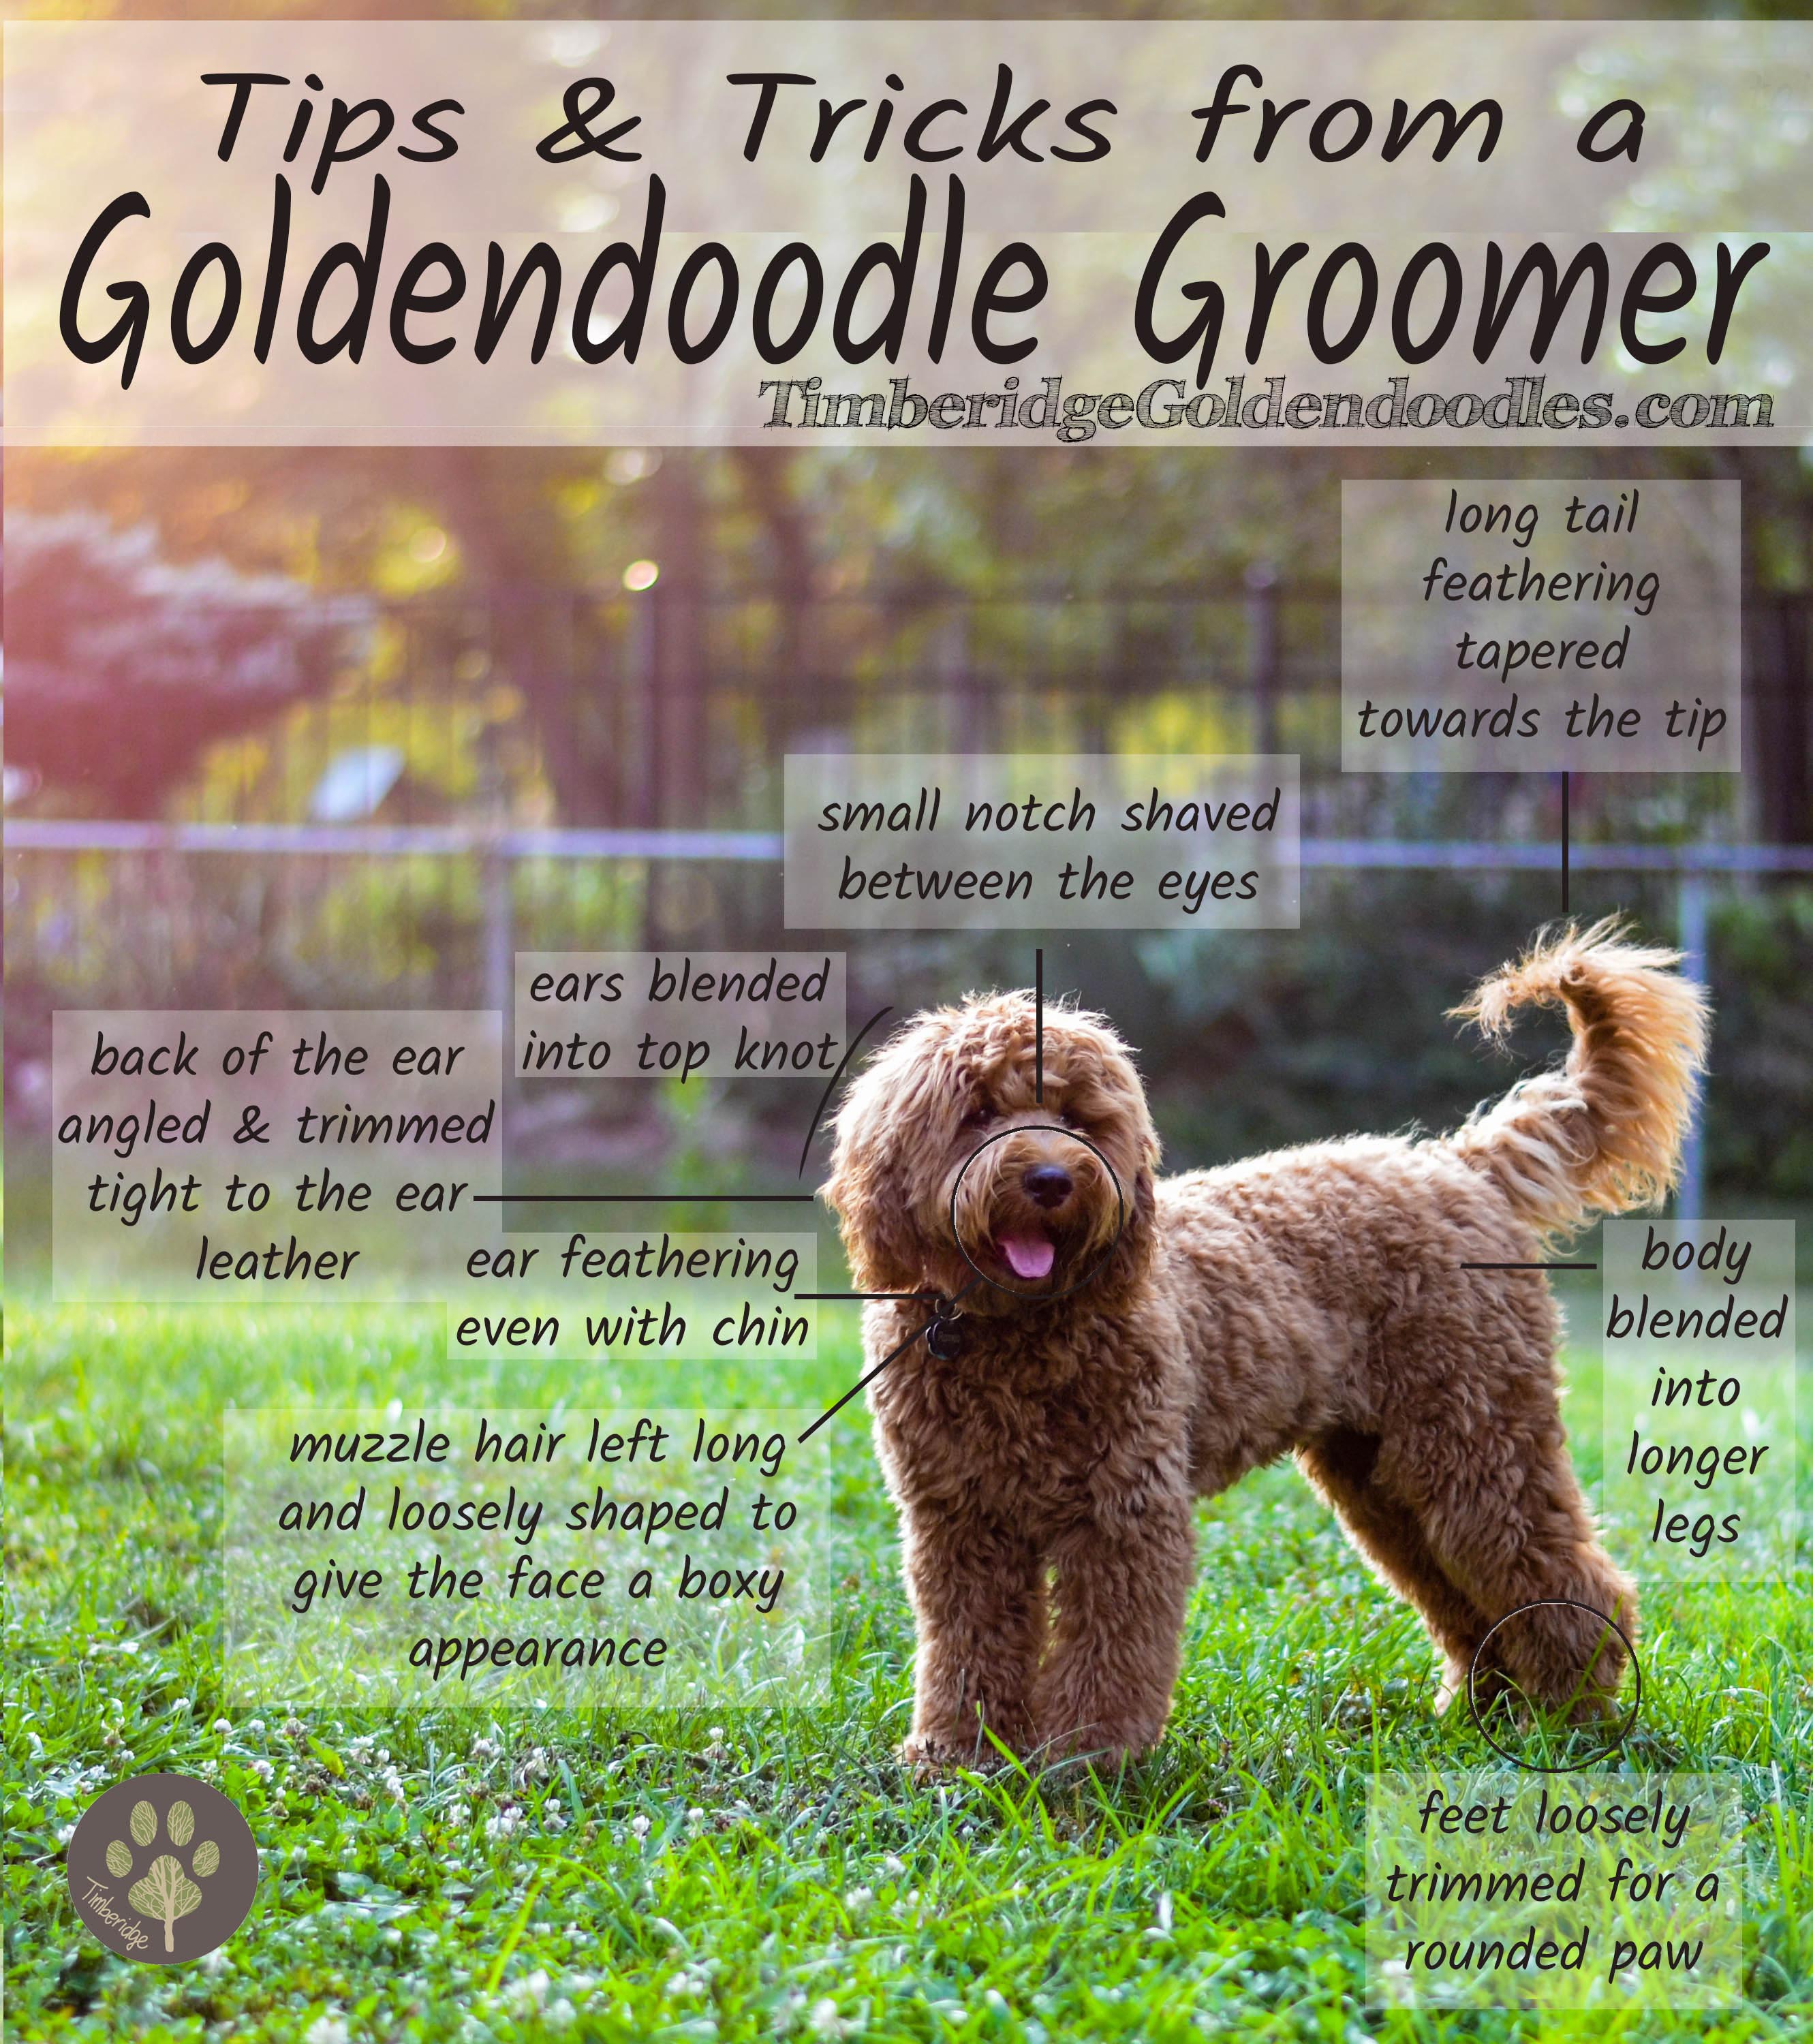 Do You Have to Groom a Goldendoodle?